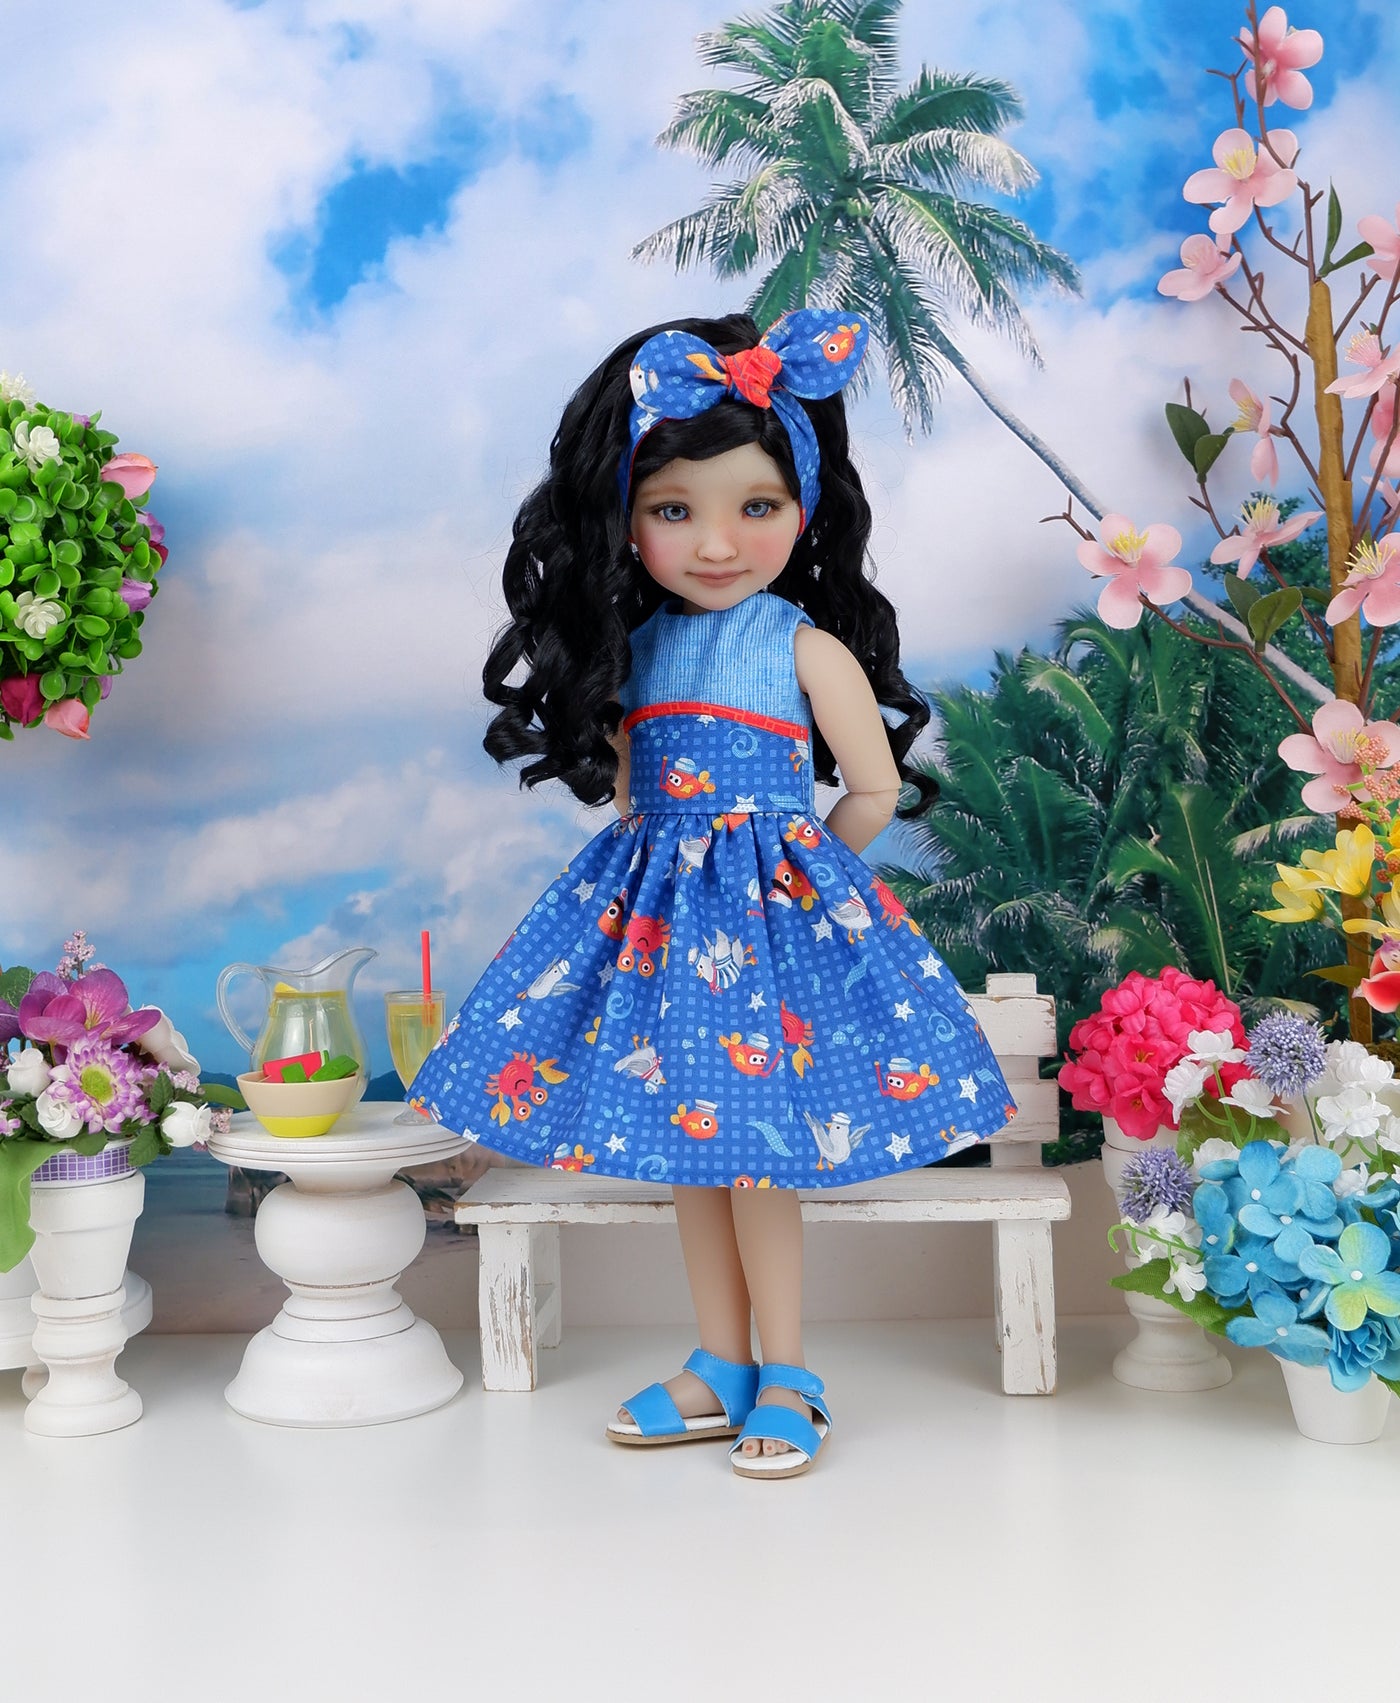 Gone Fishing - dress and sandals for Ruby Red Fashion Friends doll